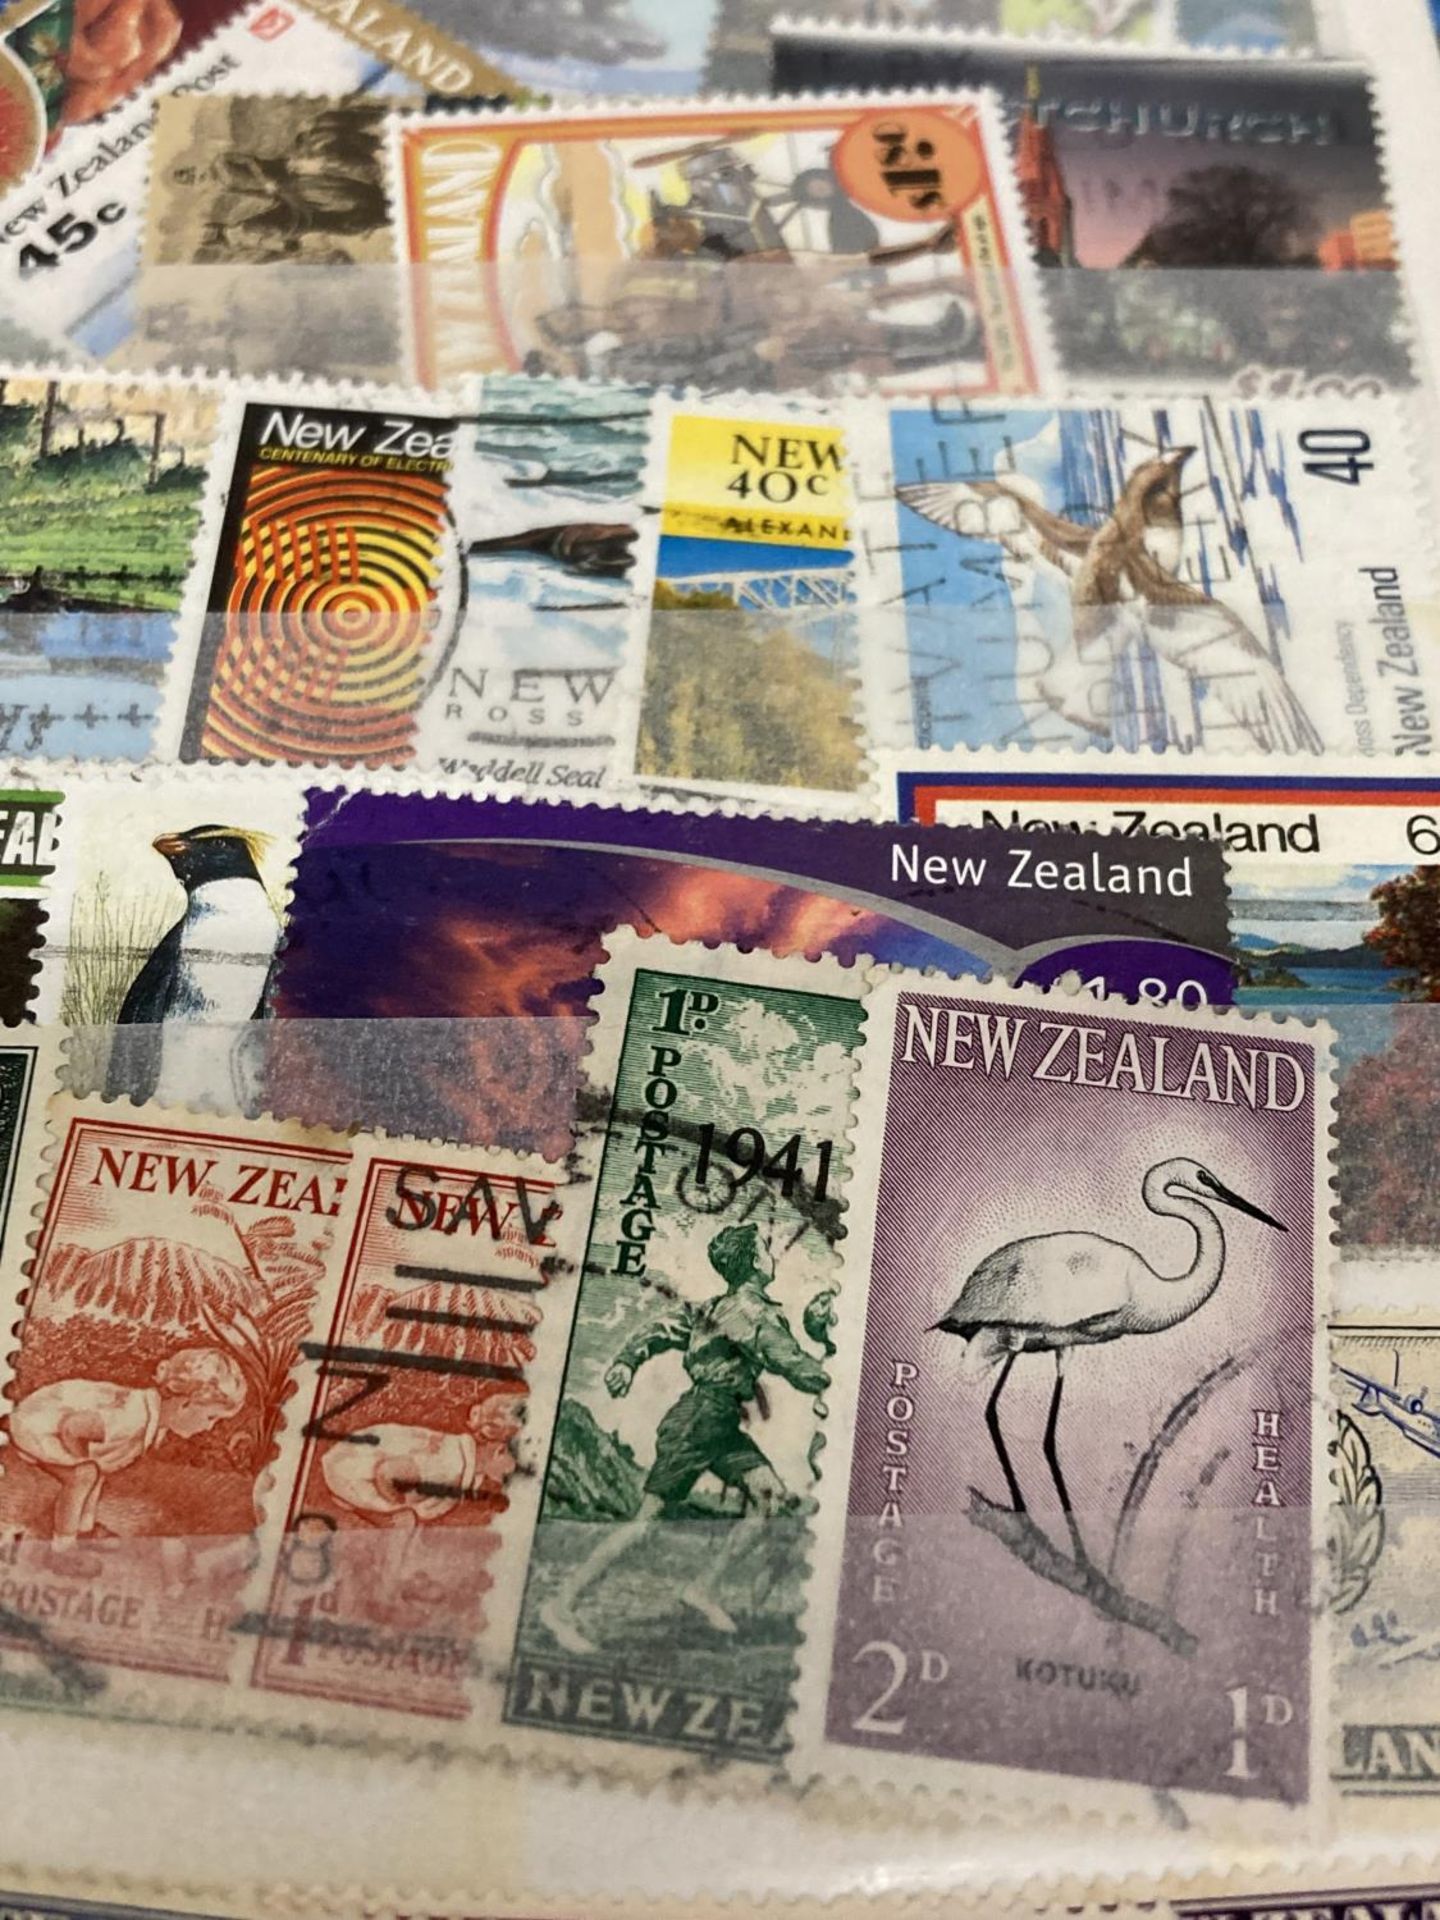 TWO ALBUMS CONTAINING STAMPS OF NEW ZEALAND - Image 2 of 5